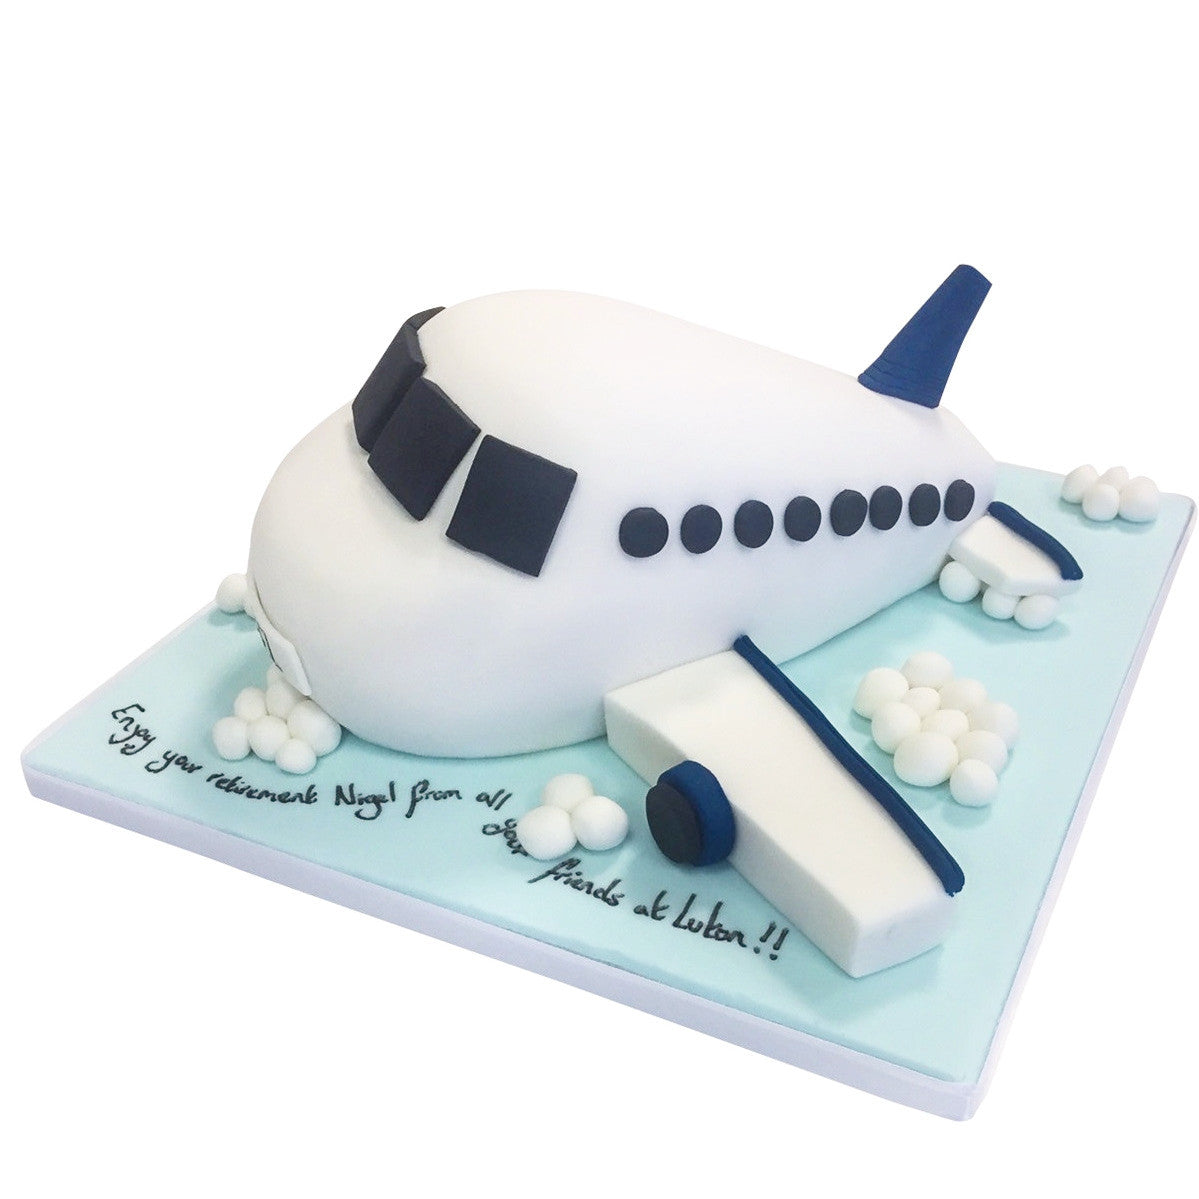 Vintage Airplane Cake Topper - YouTube